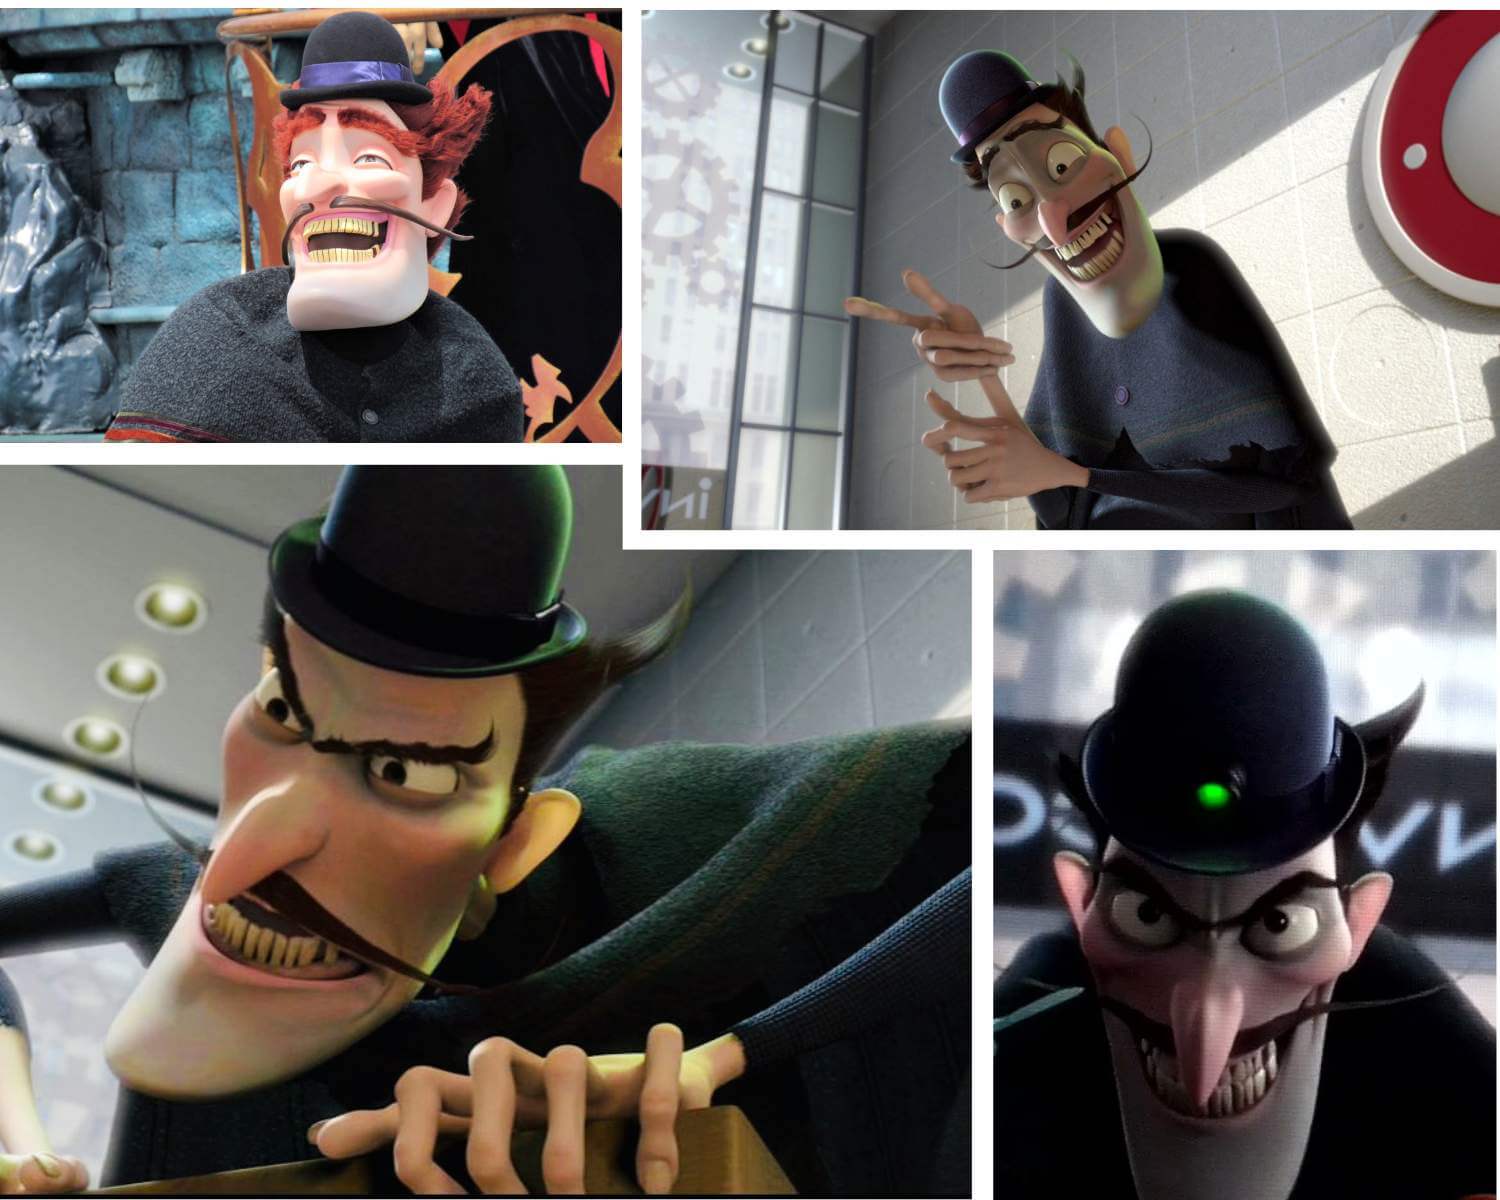 Who is the Bowler Hat Guy from Meet the Robinsons